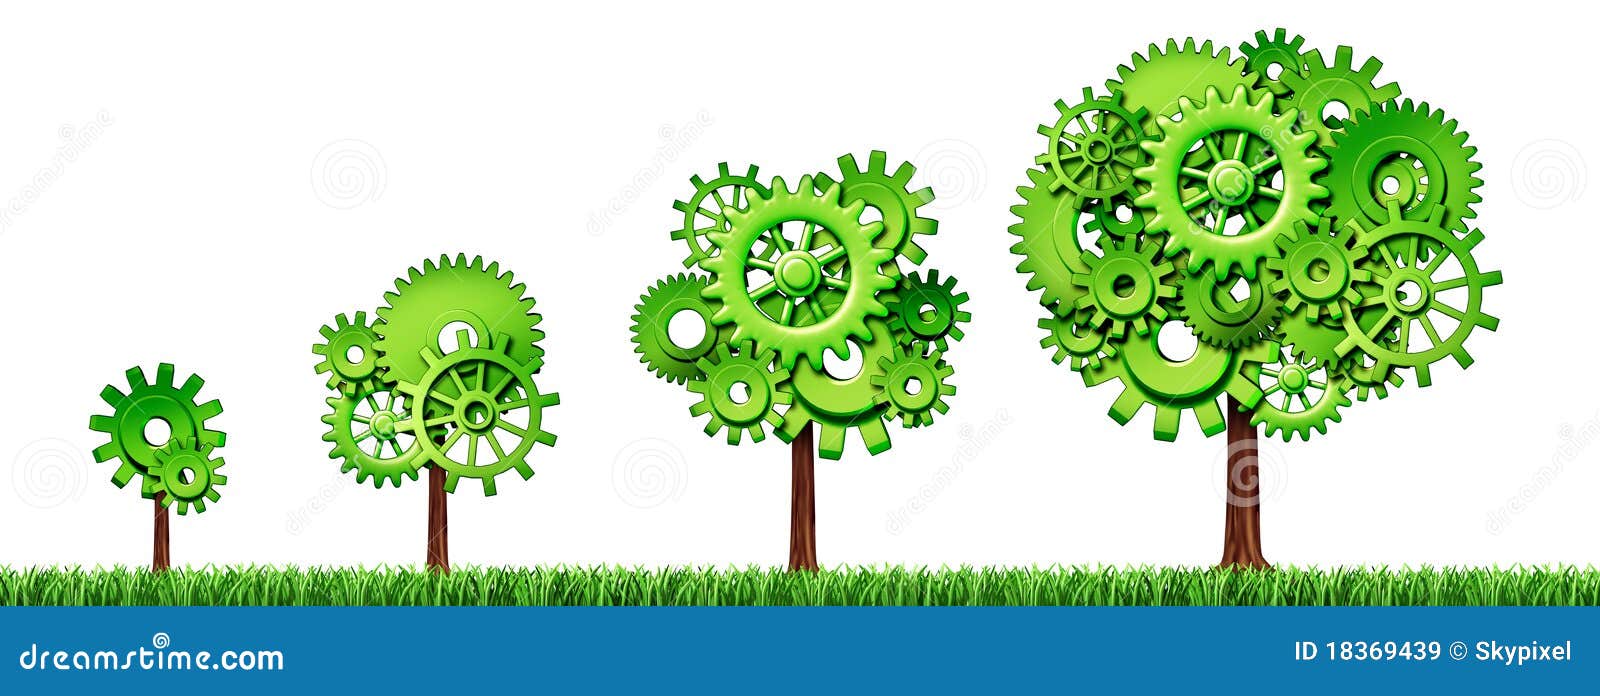 growing economy  with trees and gears